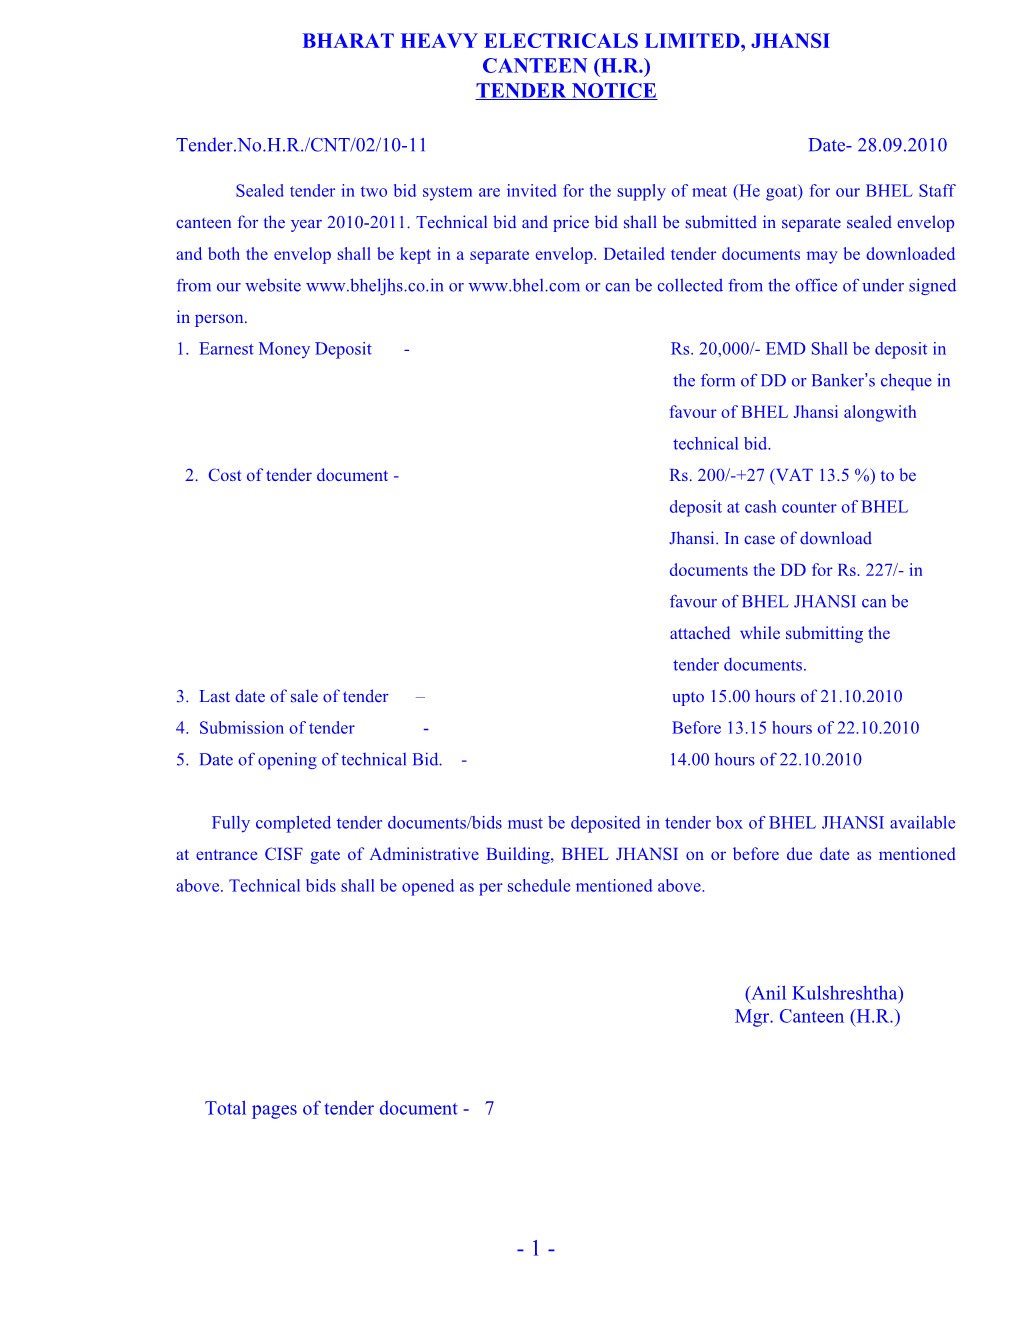 Subject : Annual Contract for the Supply of Vegetables for The